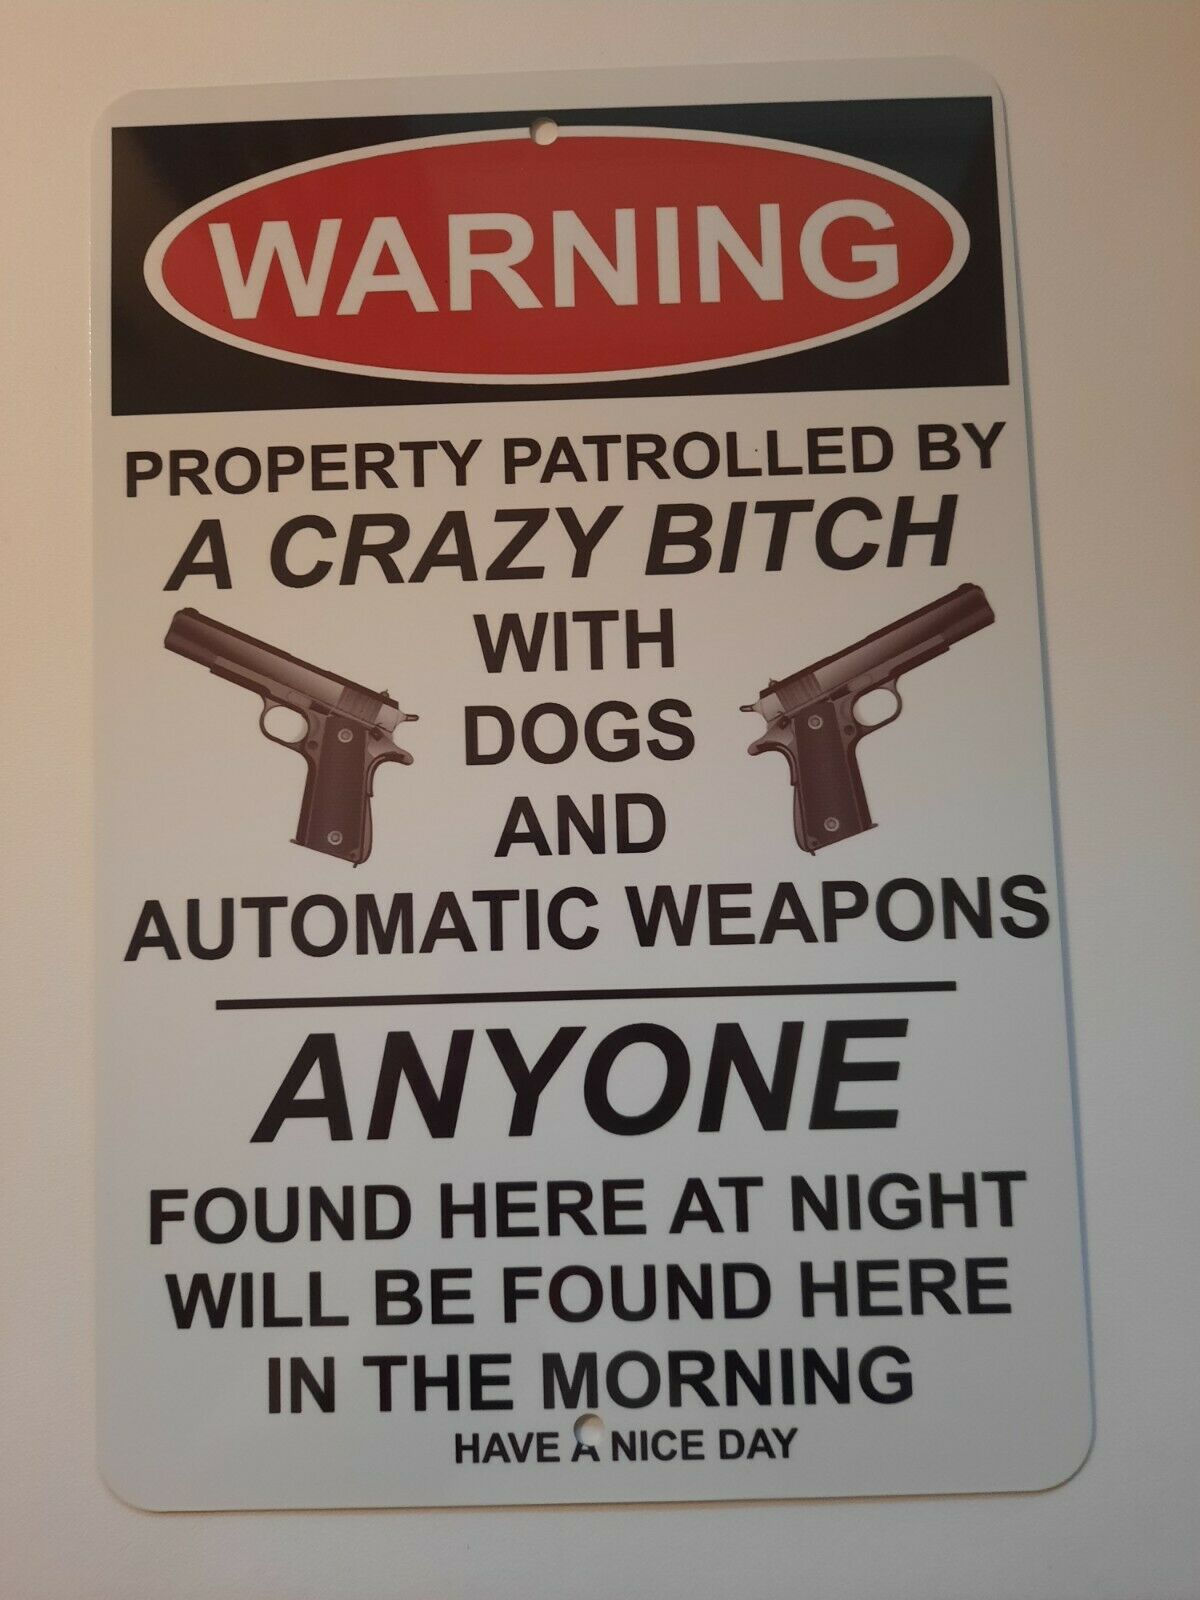 Property Patrolled By a Crazy Bitch 8x12 Metal Wall Warning Sign Garage Man Cave